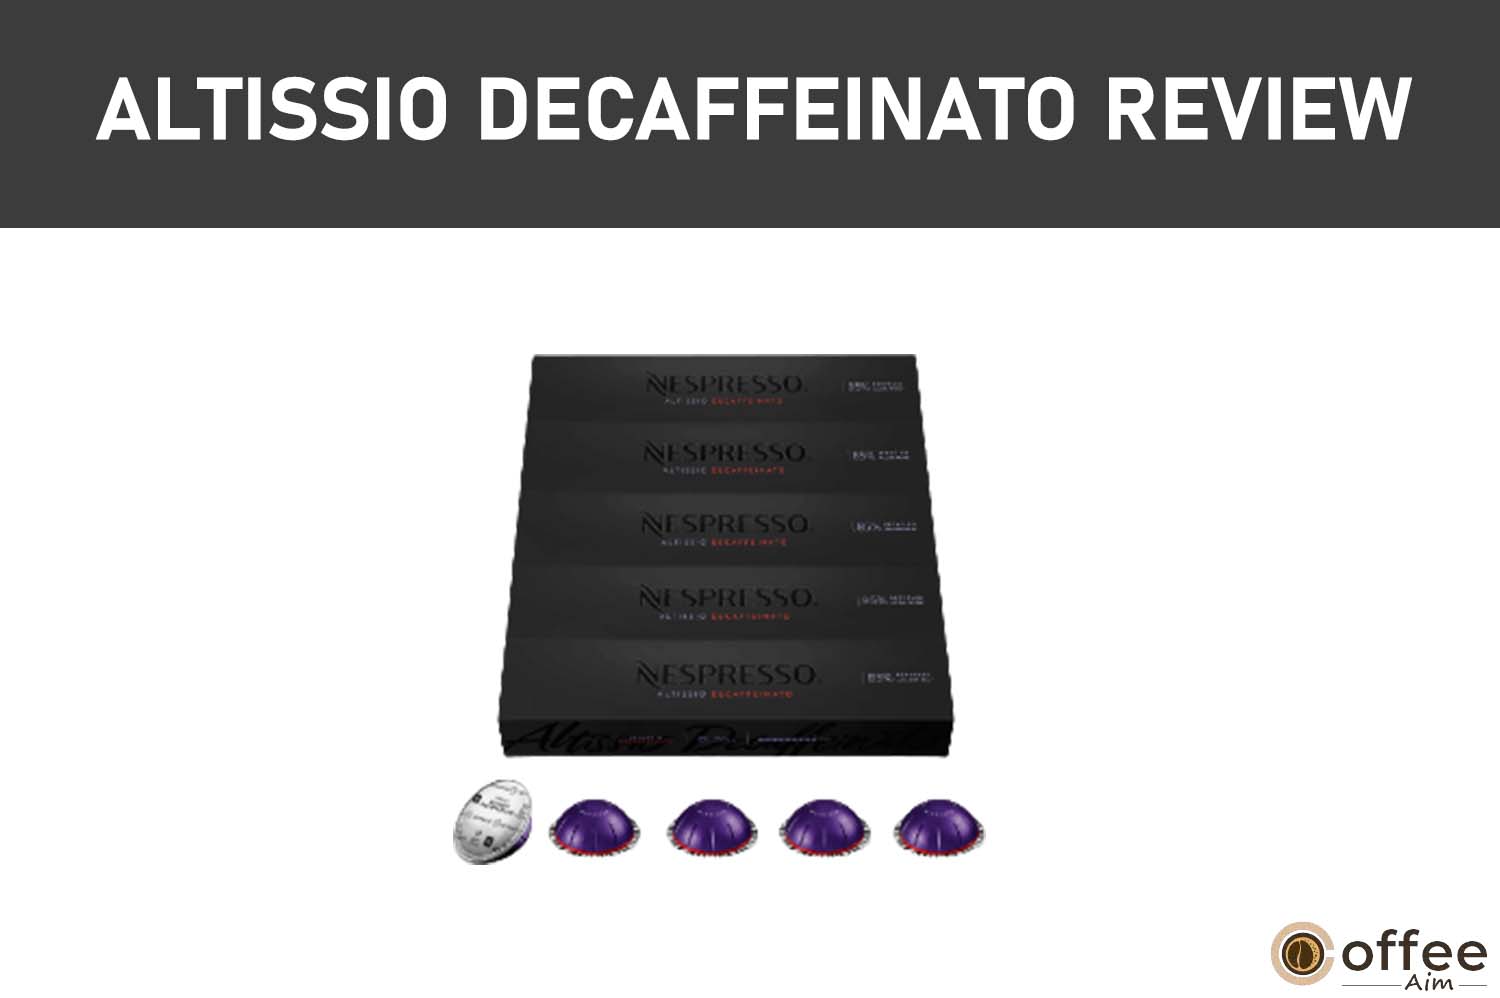 featured image for the article "Altissio Decaffeinato Review"